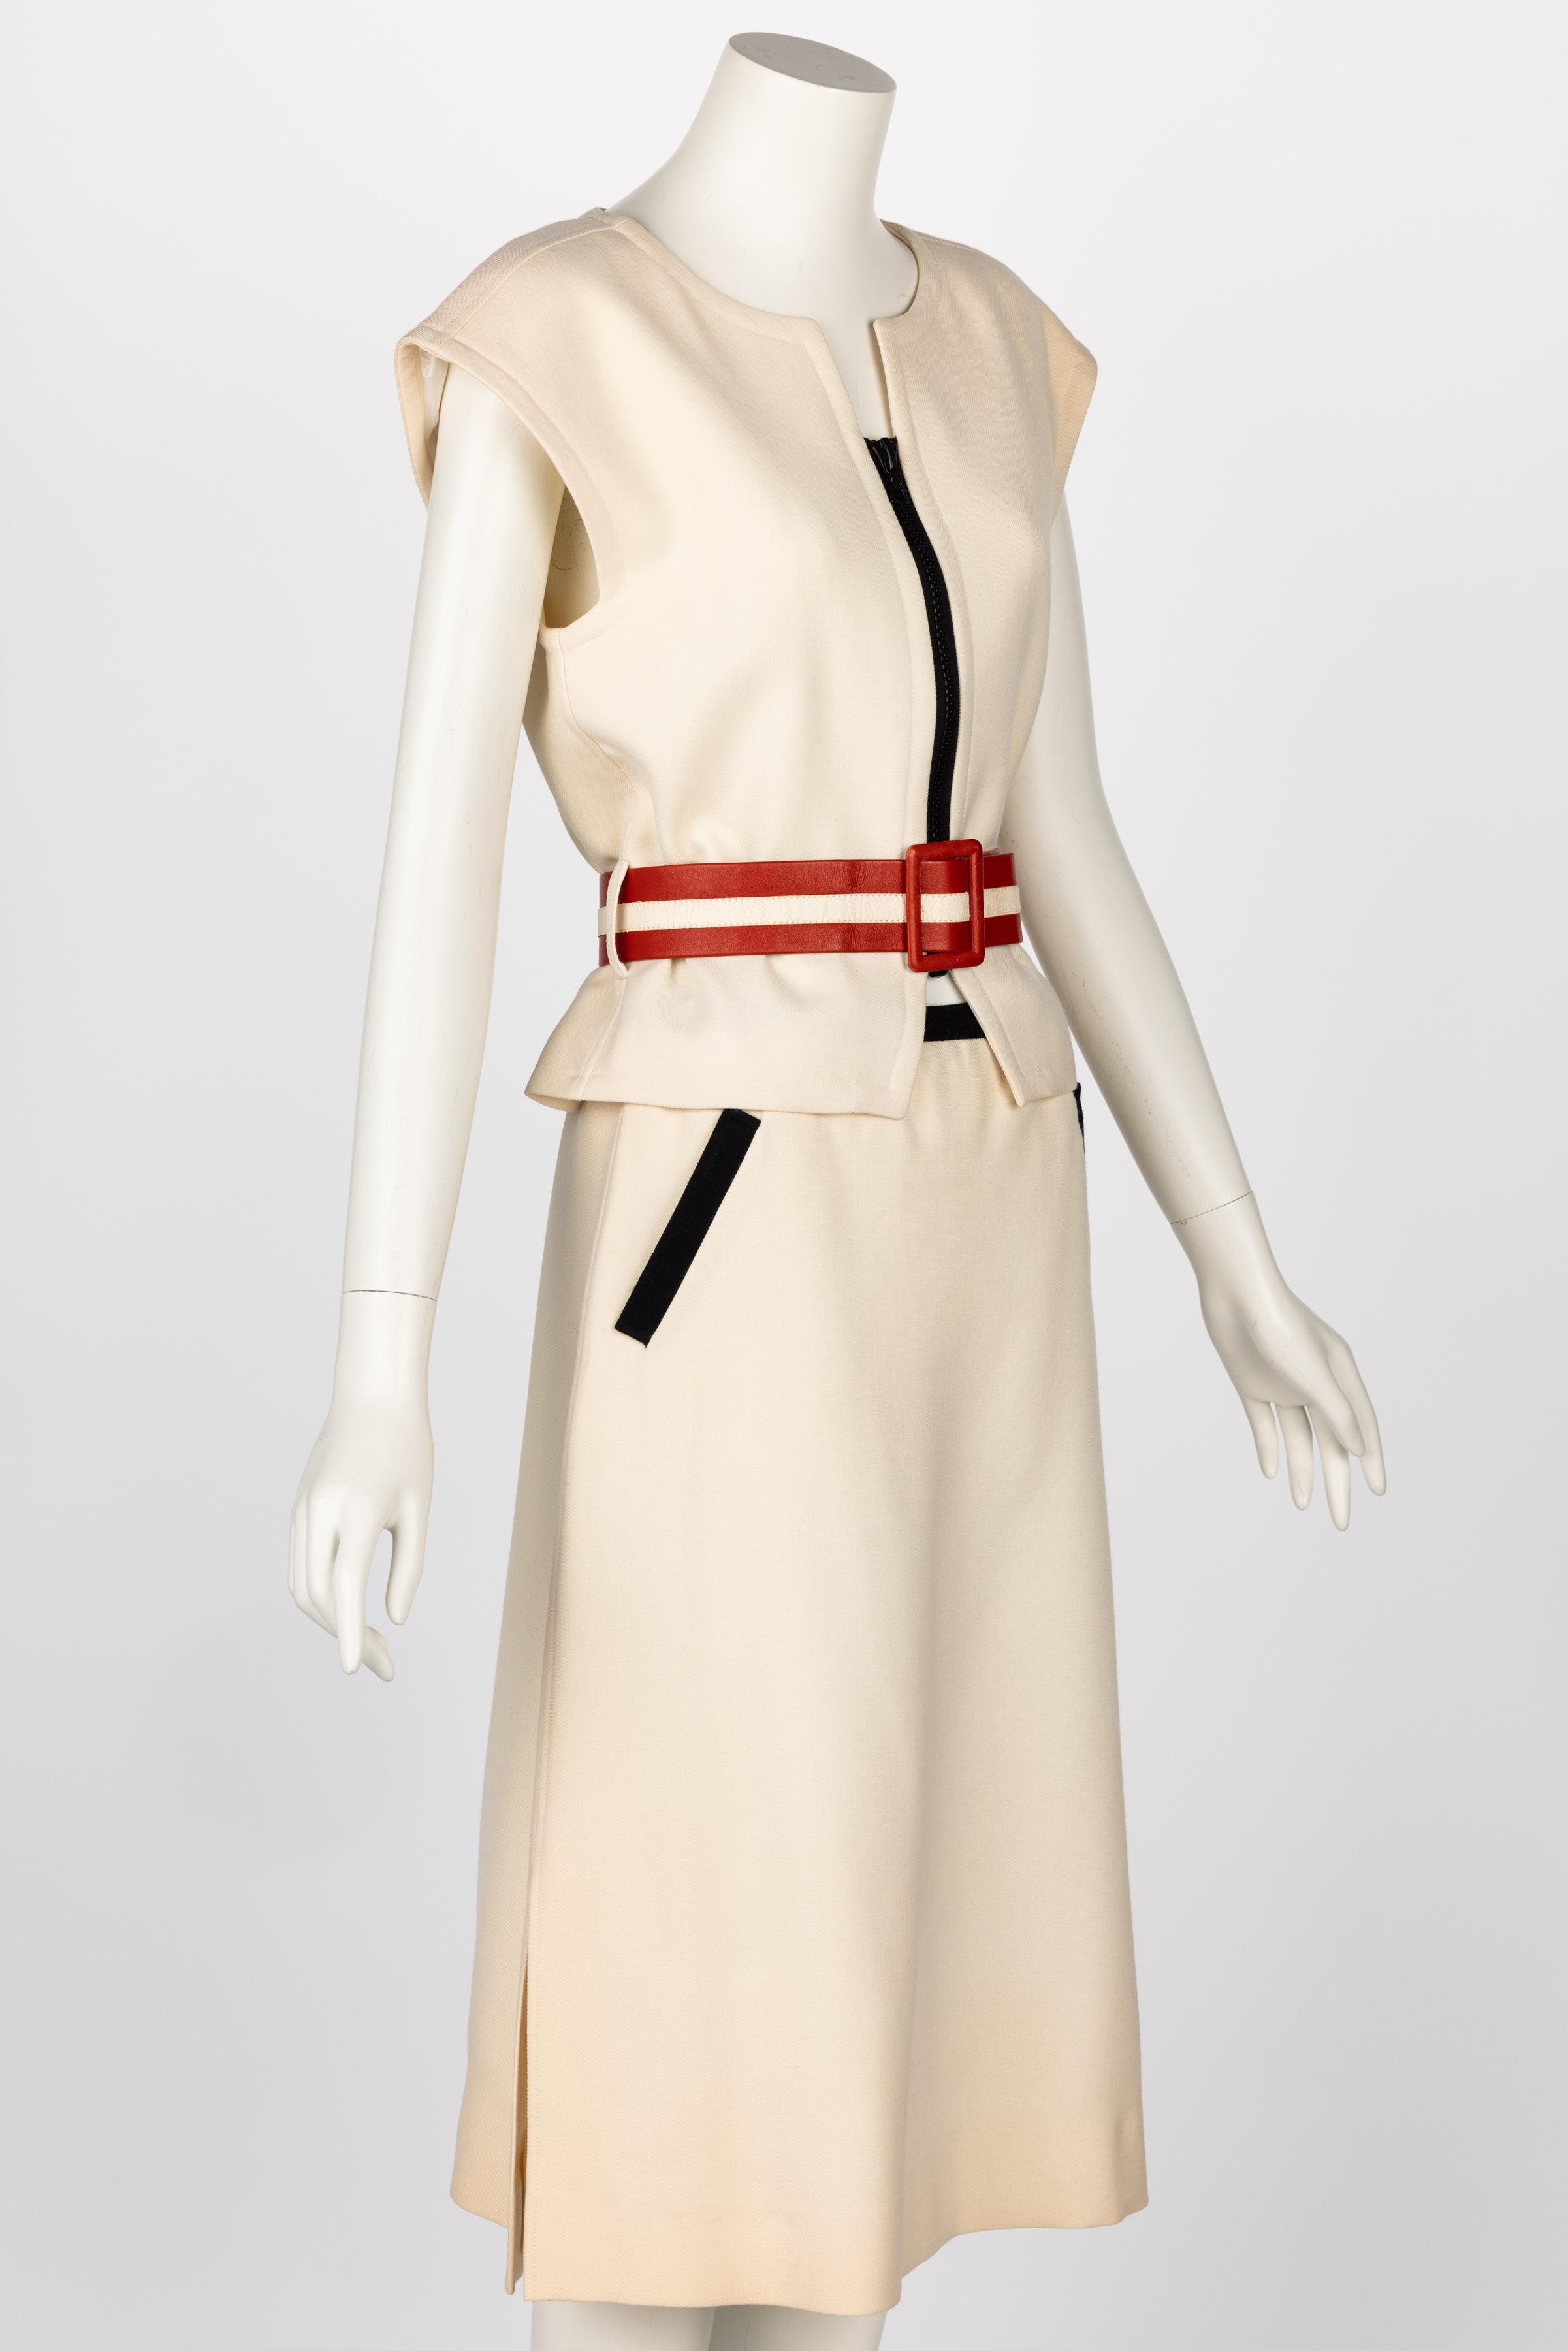 VIintage Courrèges Paris Ivory Wool Belted Jacket & Skirt In Excellent Condition For Sale In Boca Raton, FL